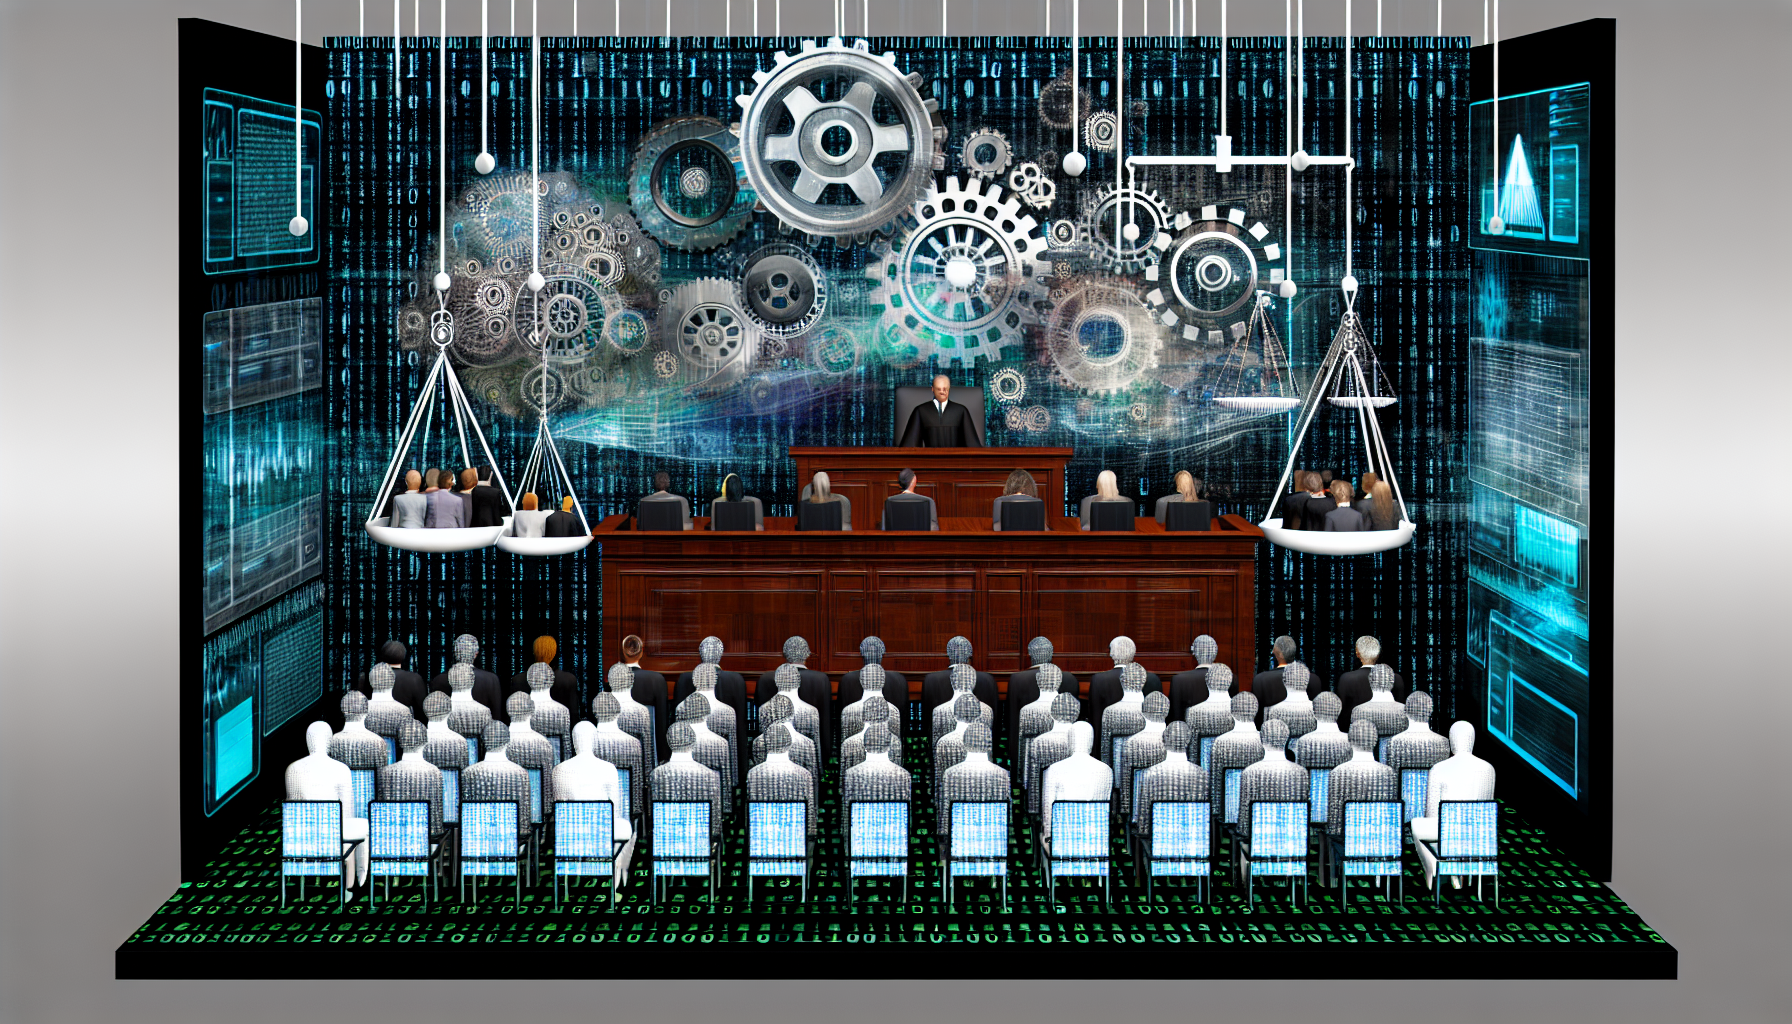 A courtroom with AI elements symbolizing the legal battle between OpenAI and The New York Times